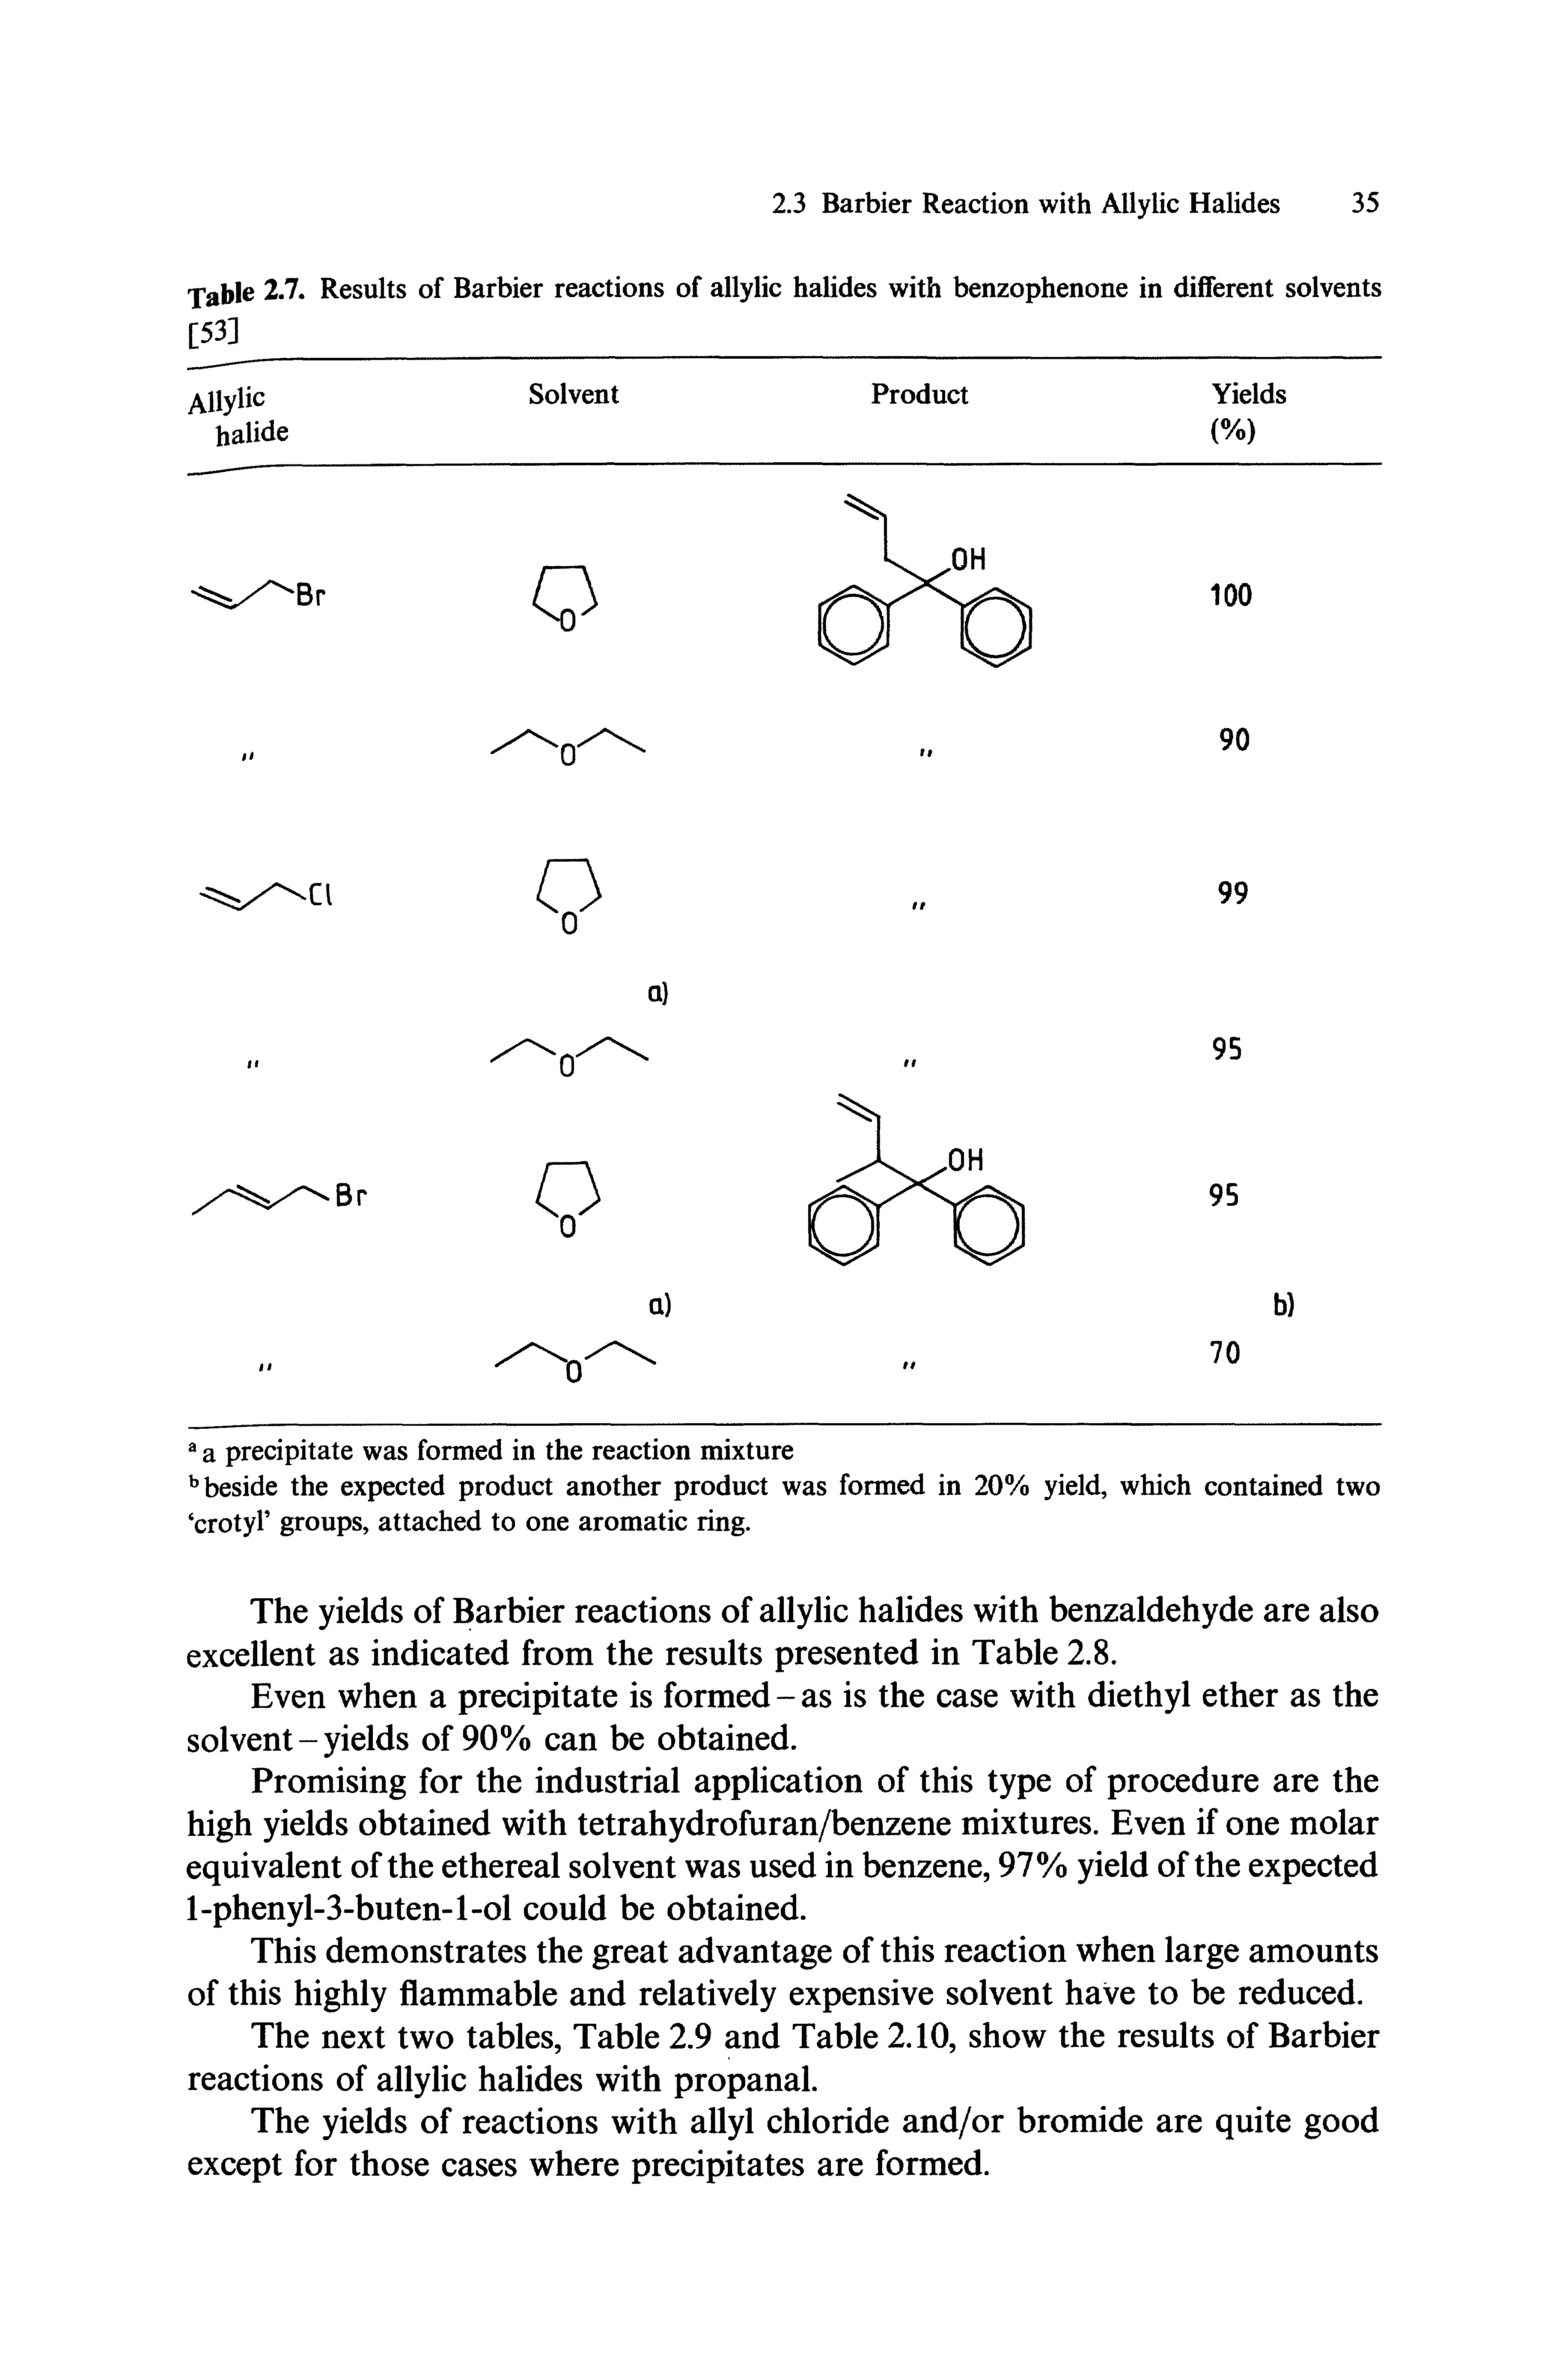 Table 2.7. Results of Barbier reactions of allylic halides with benzophenone in different solvents [53]...